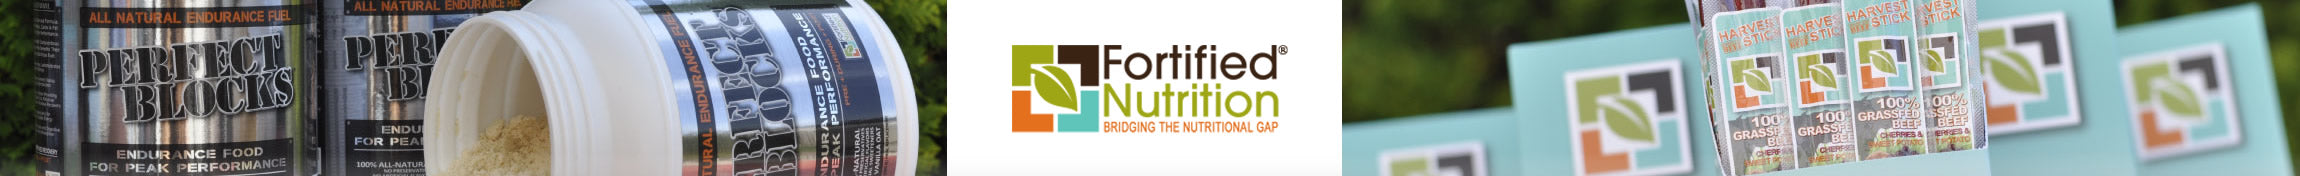 Fortified Nutrition